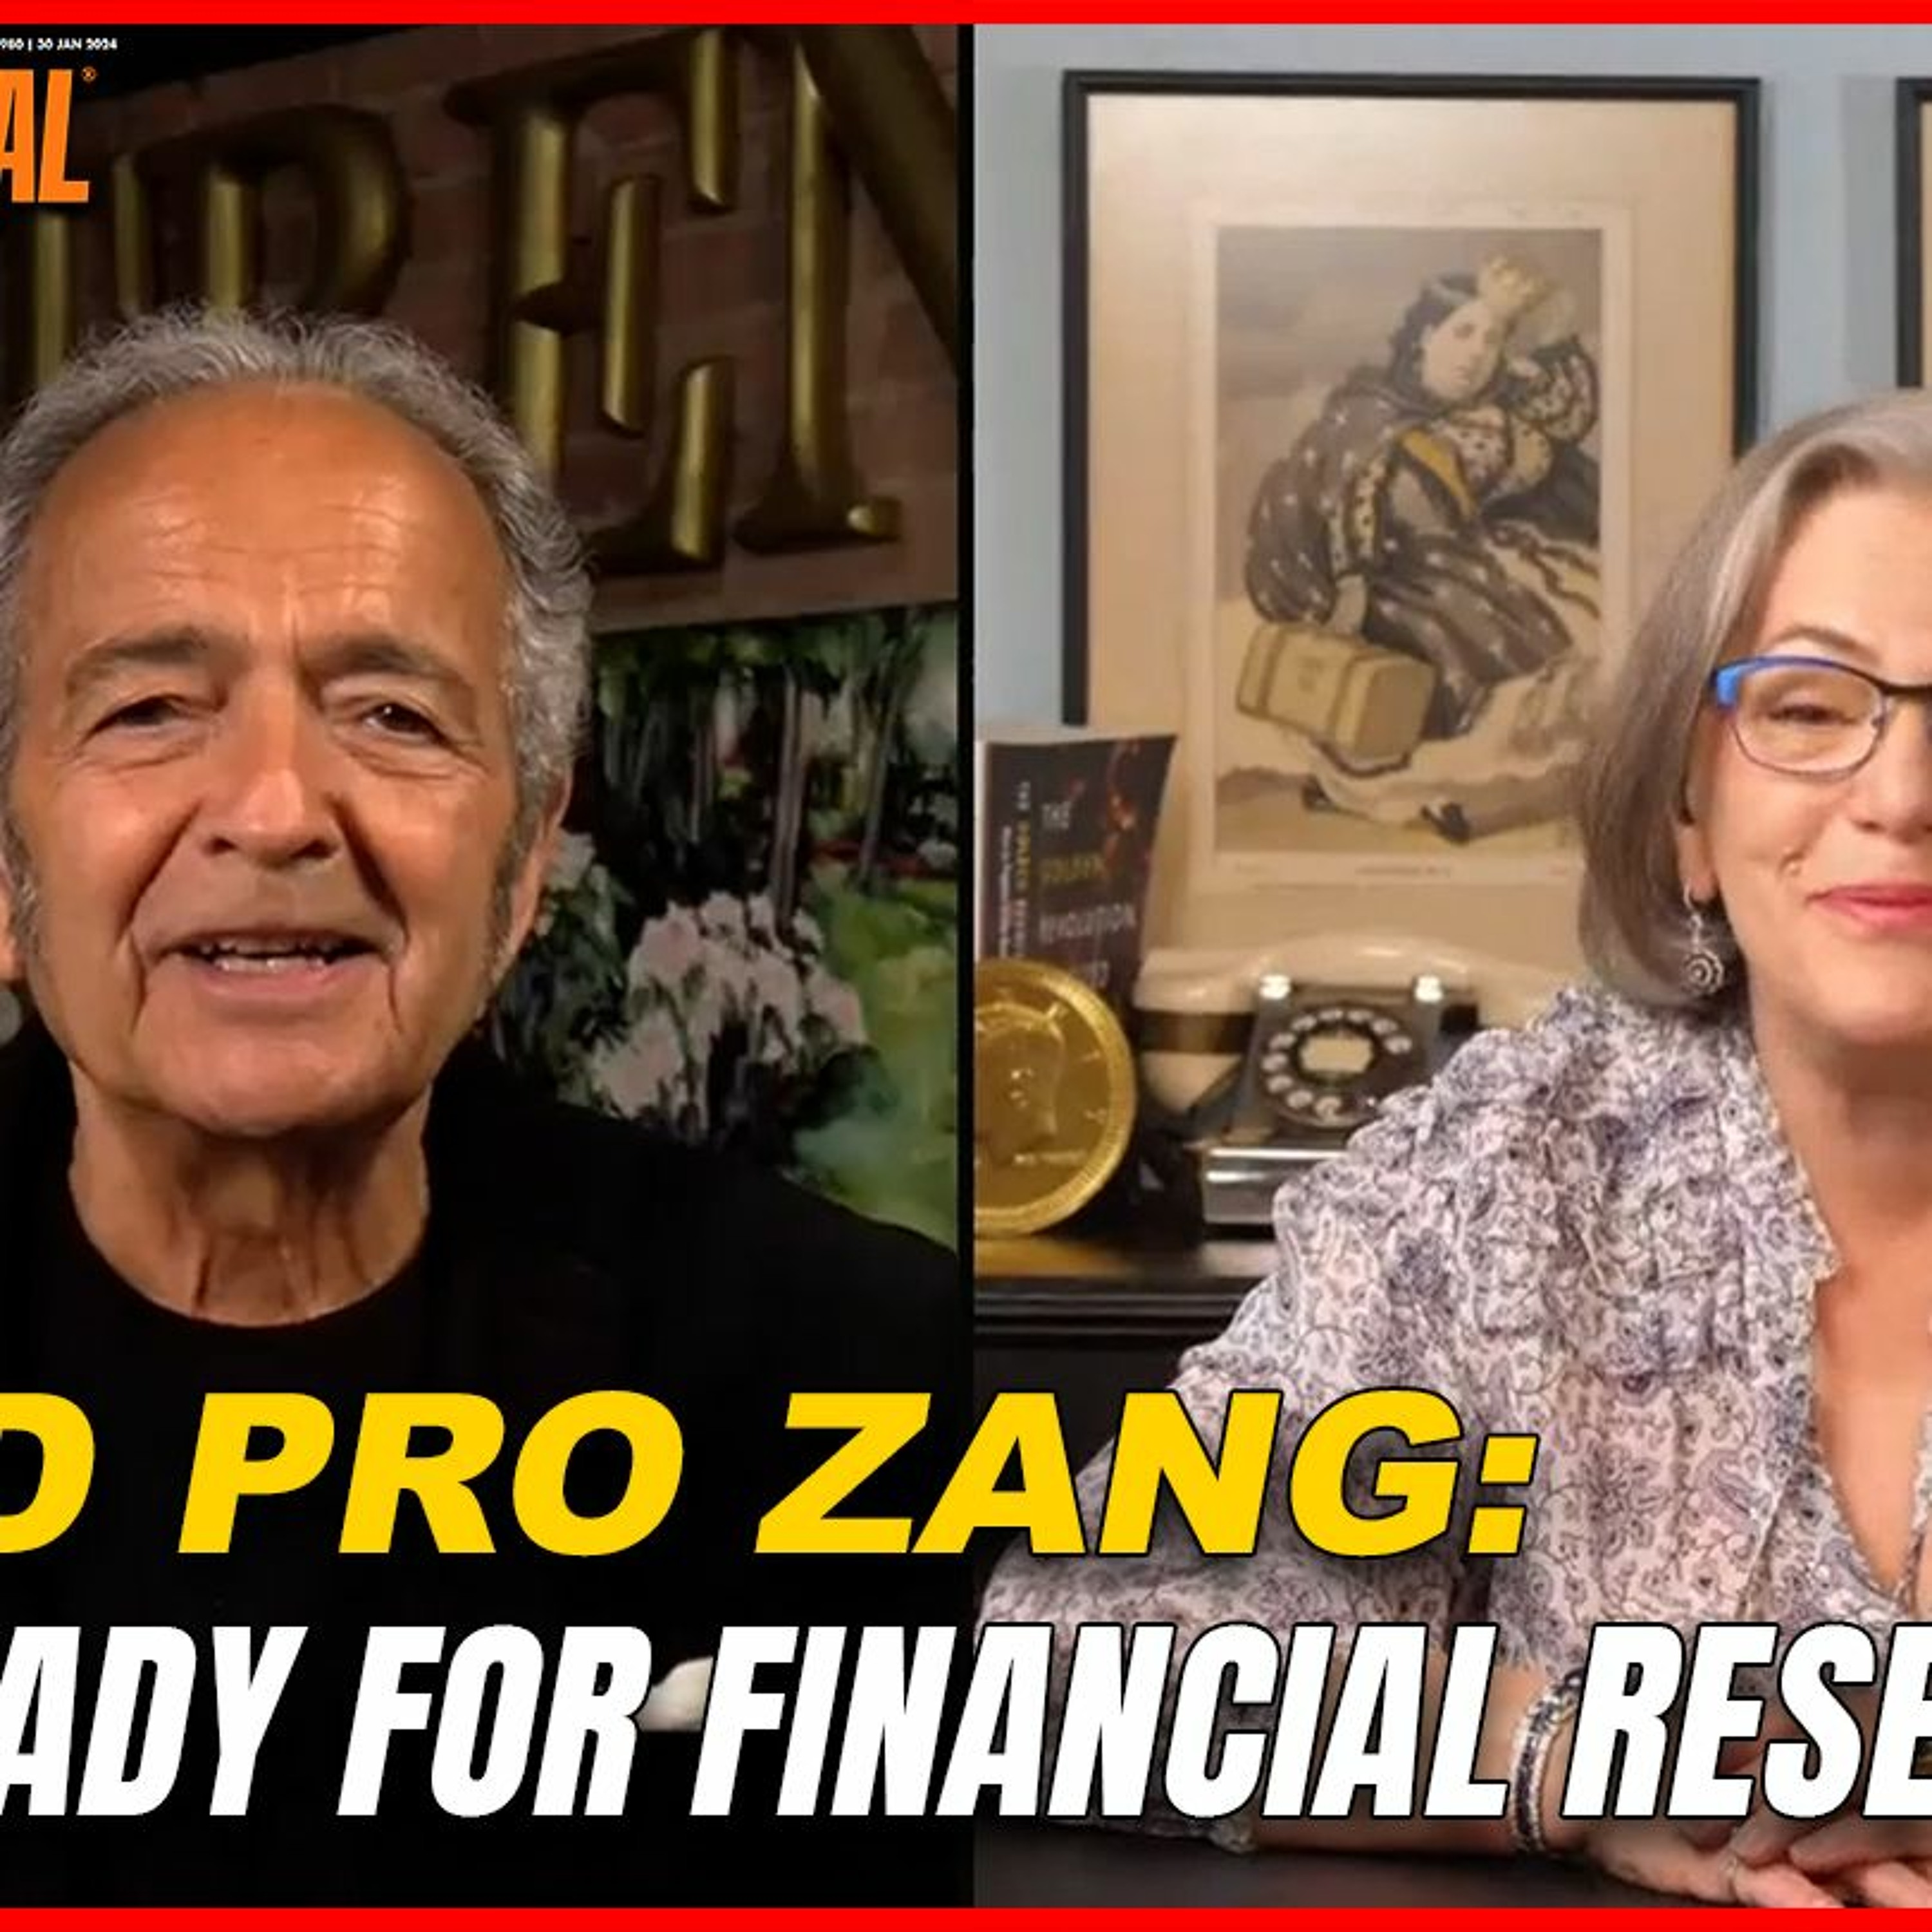 GOLD PRO ZANG GET READY FOR FINANCIAL RESET